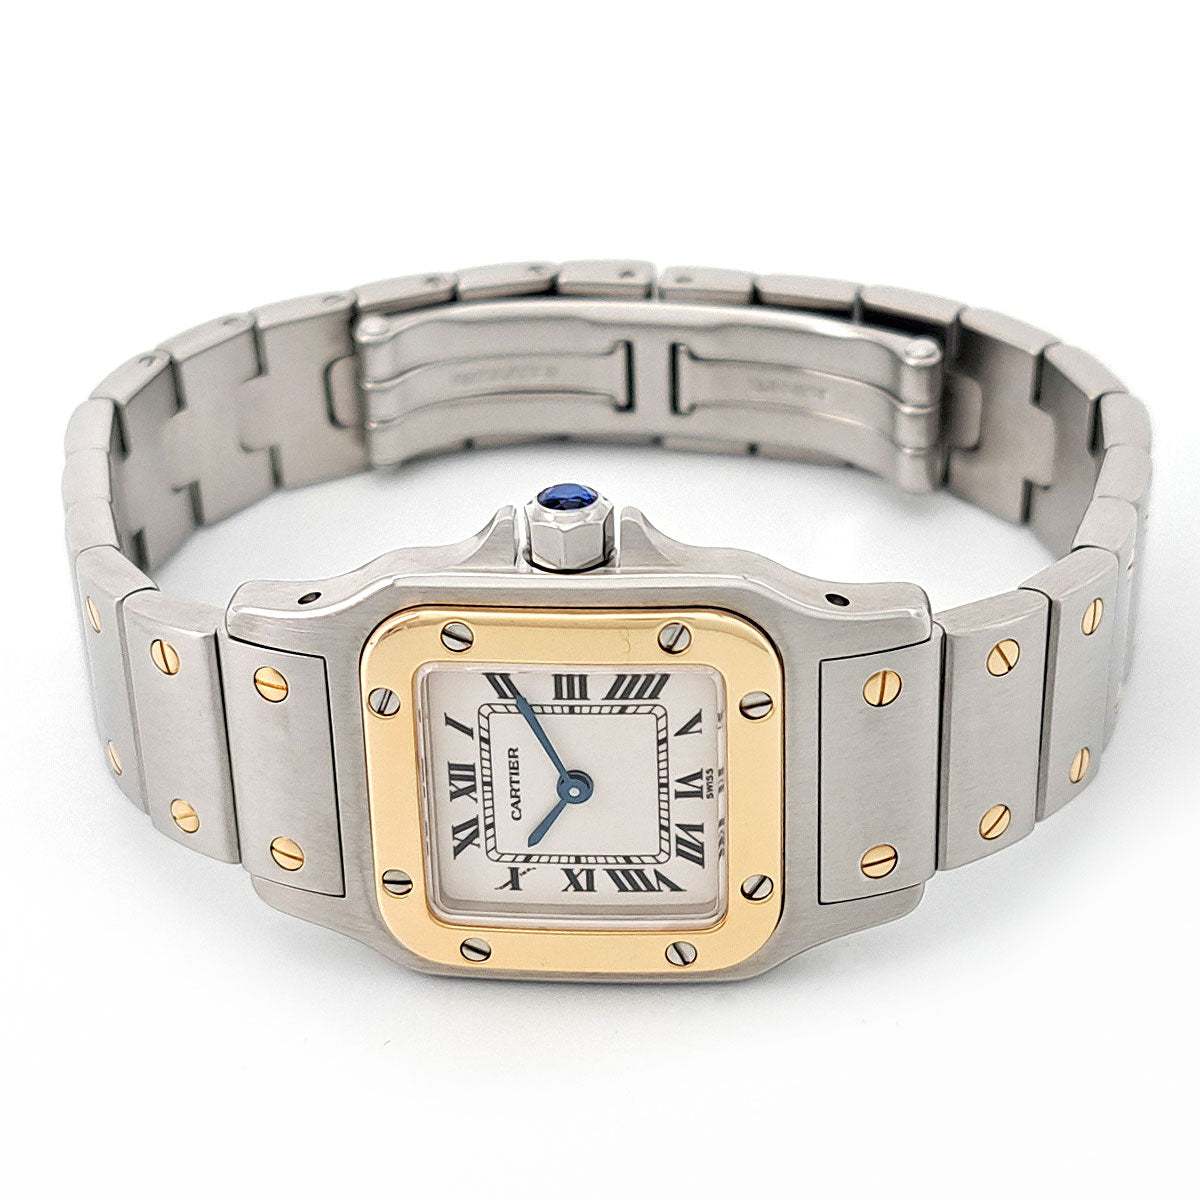 Cartier Santos Galbee Small Model Stainless Steel/Yellow Gold Ladies' Watch W20012C4